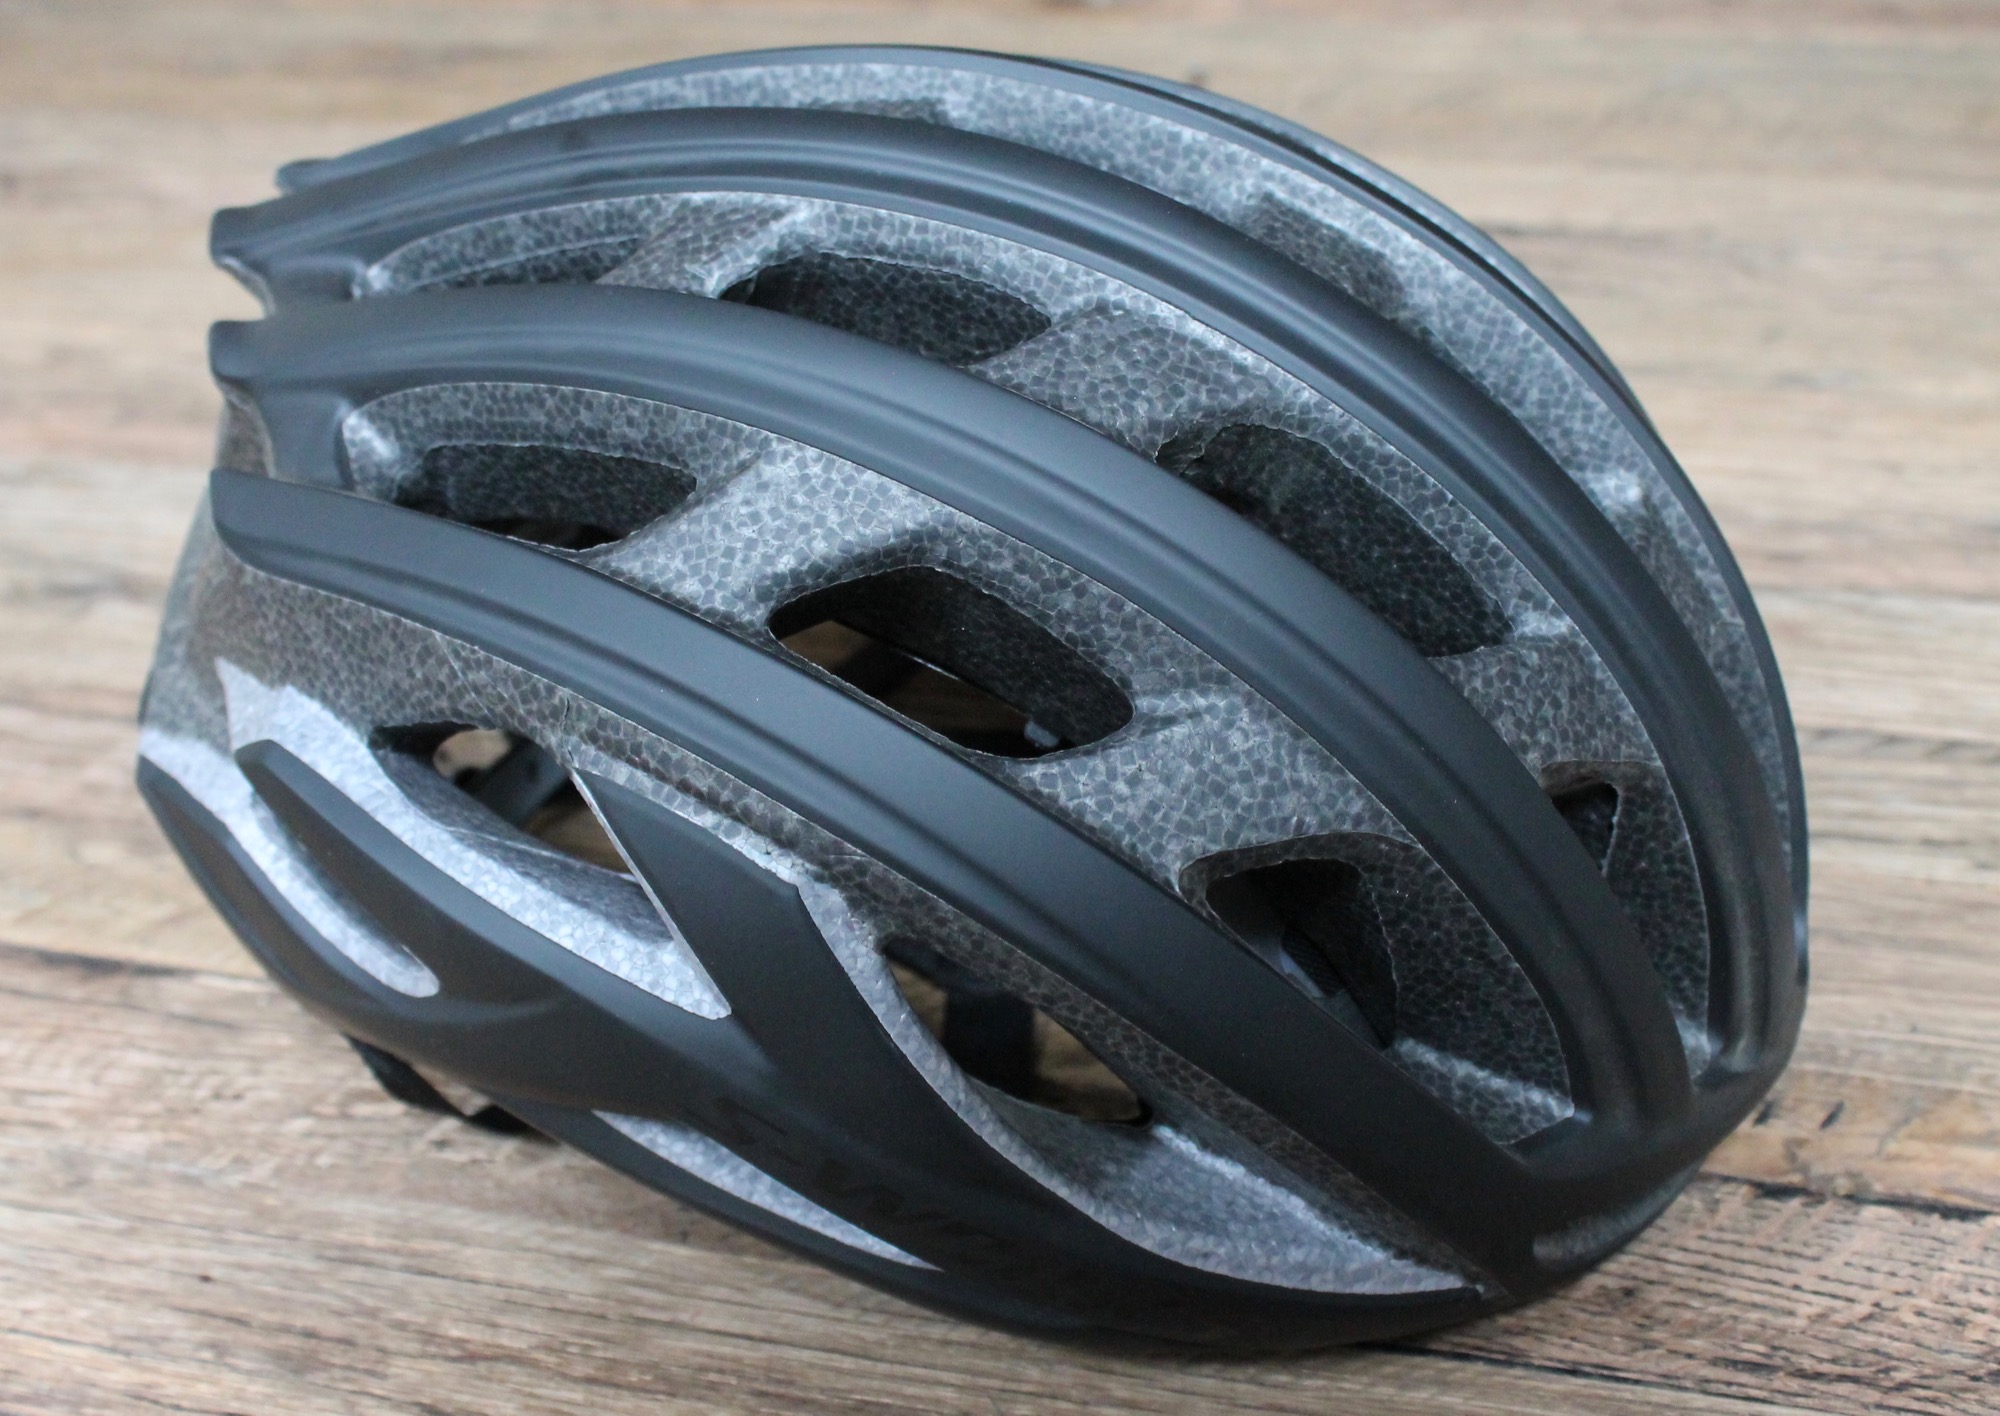 Review: Specialized S-Works Prevail II With ANGI helmet | road.cc